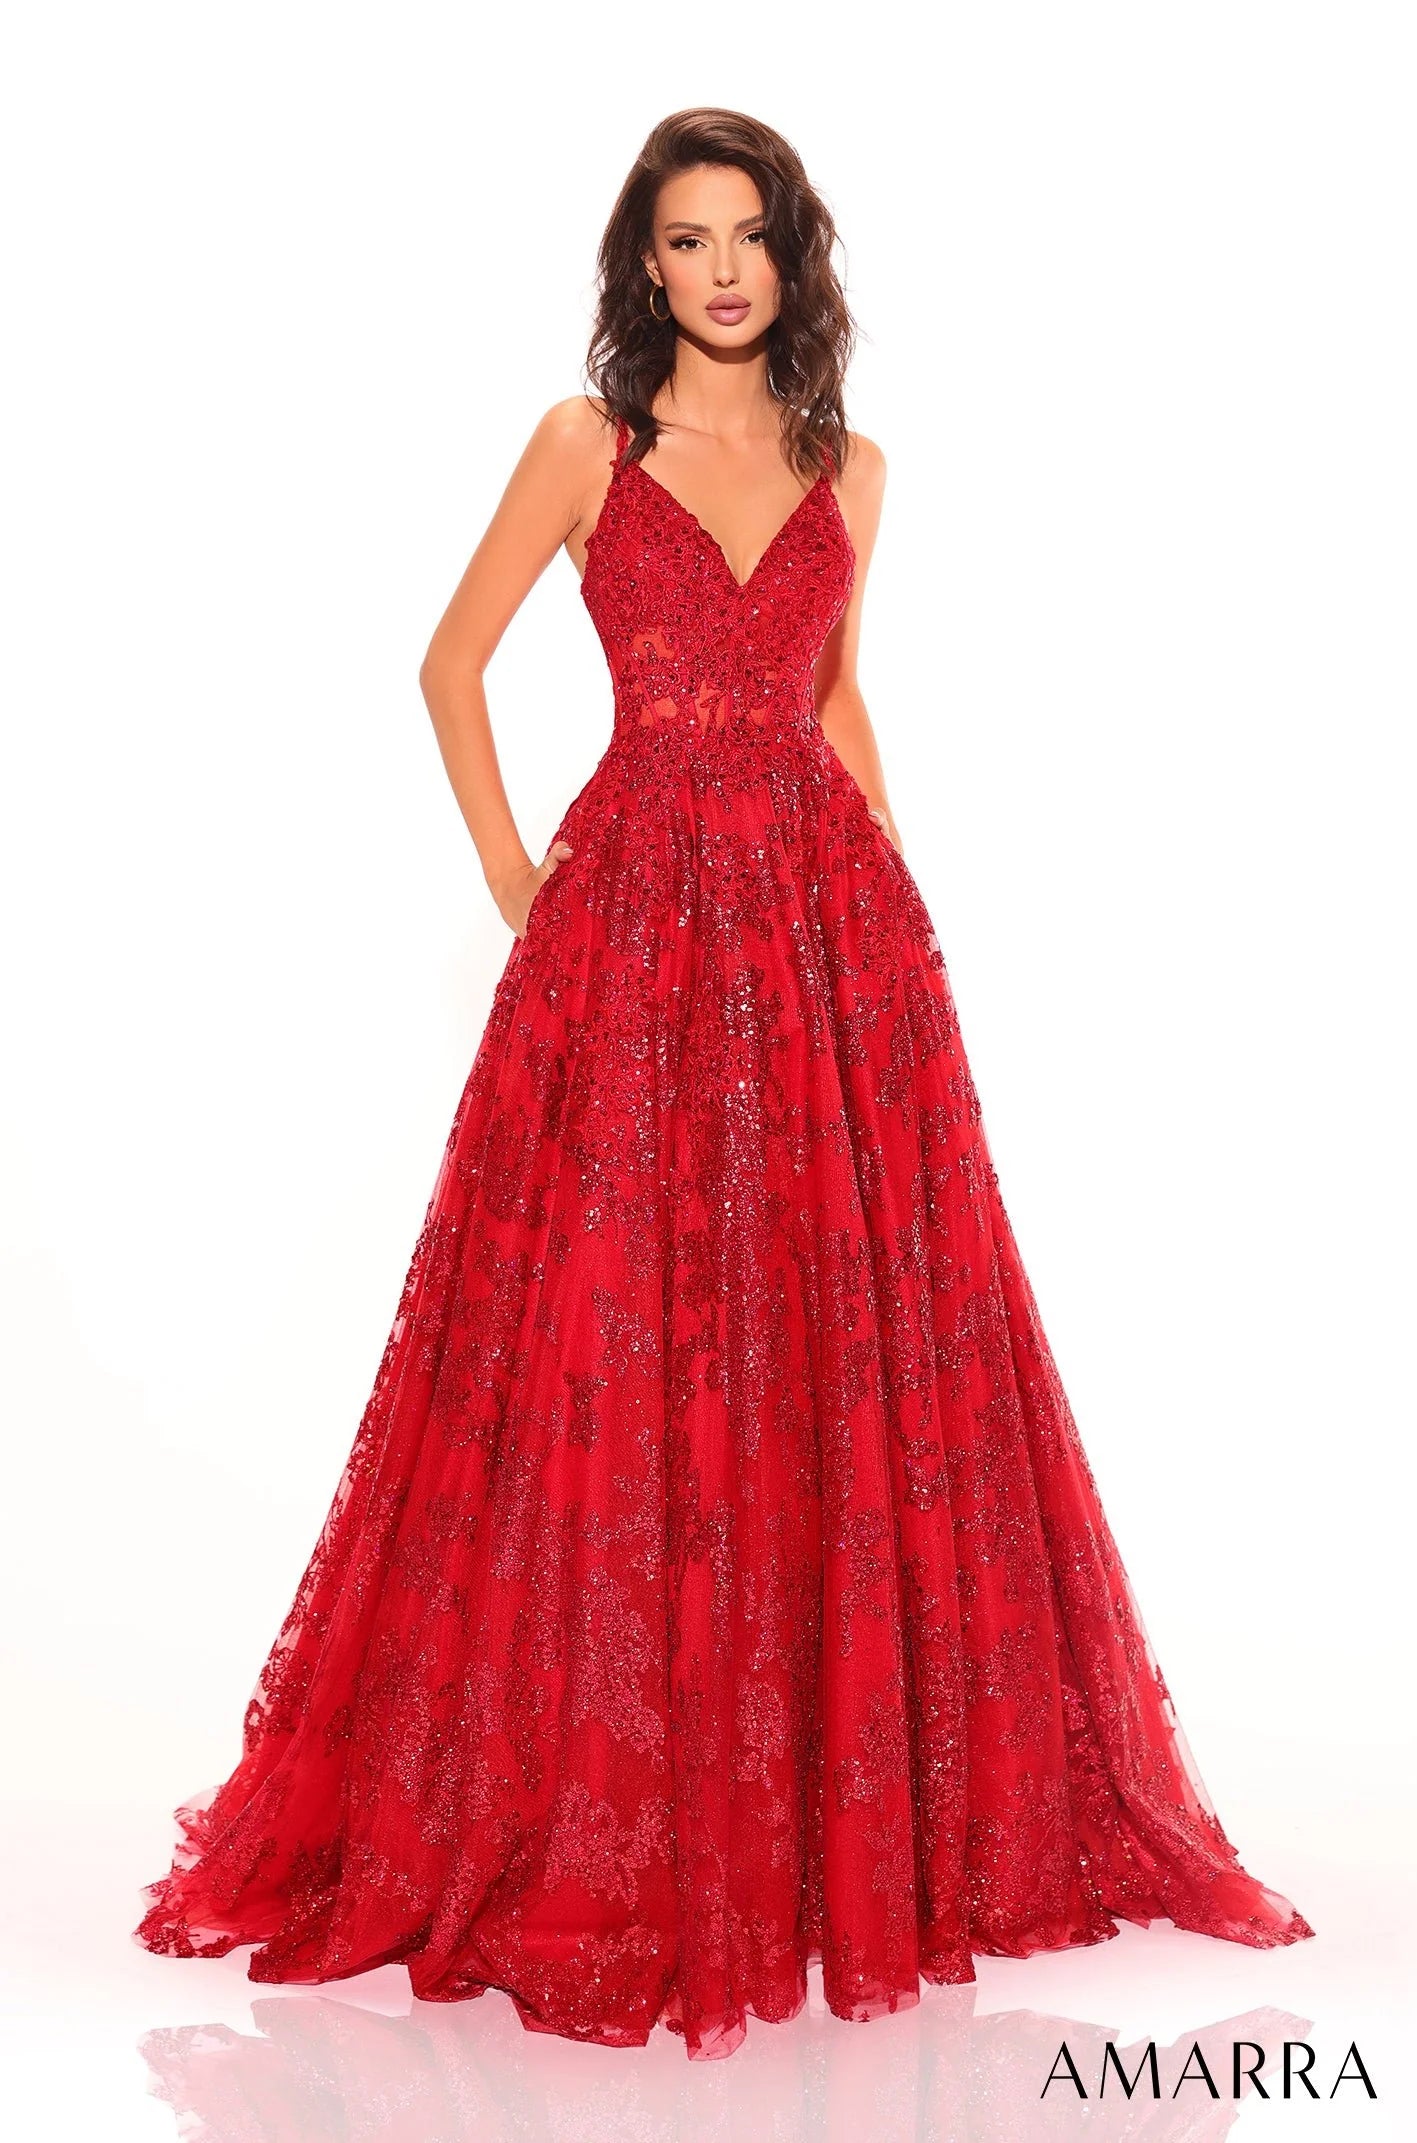 Amarra 88727 Behold this mesmerizing ball gown, a true enchantress among prom dresses. Its captivating design and undeniable charm will leave you breathless. Embellished with shimmering tulle and exquisite three-dimensional floral details, this gown is a true beauty! The sweetheart neckline and delicate spaghetti straps gracefully enhance your silhouette, while the stunning strappy back adds an extra touch of elegance. 